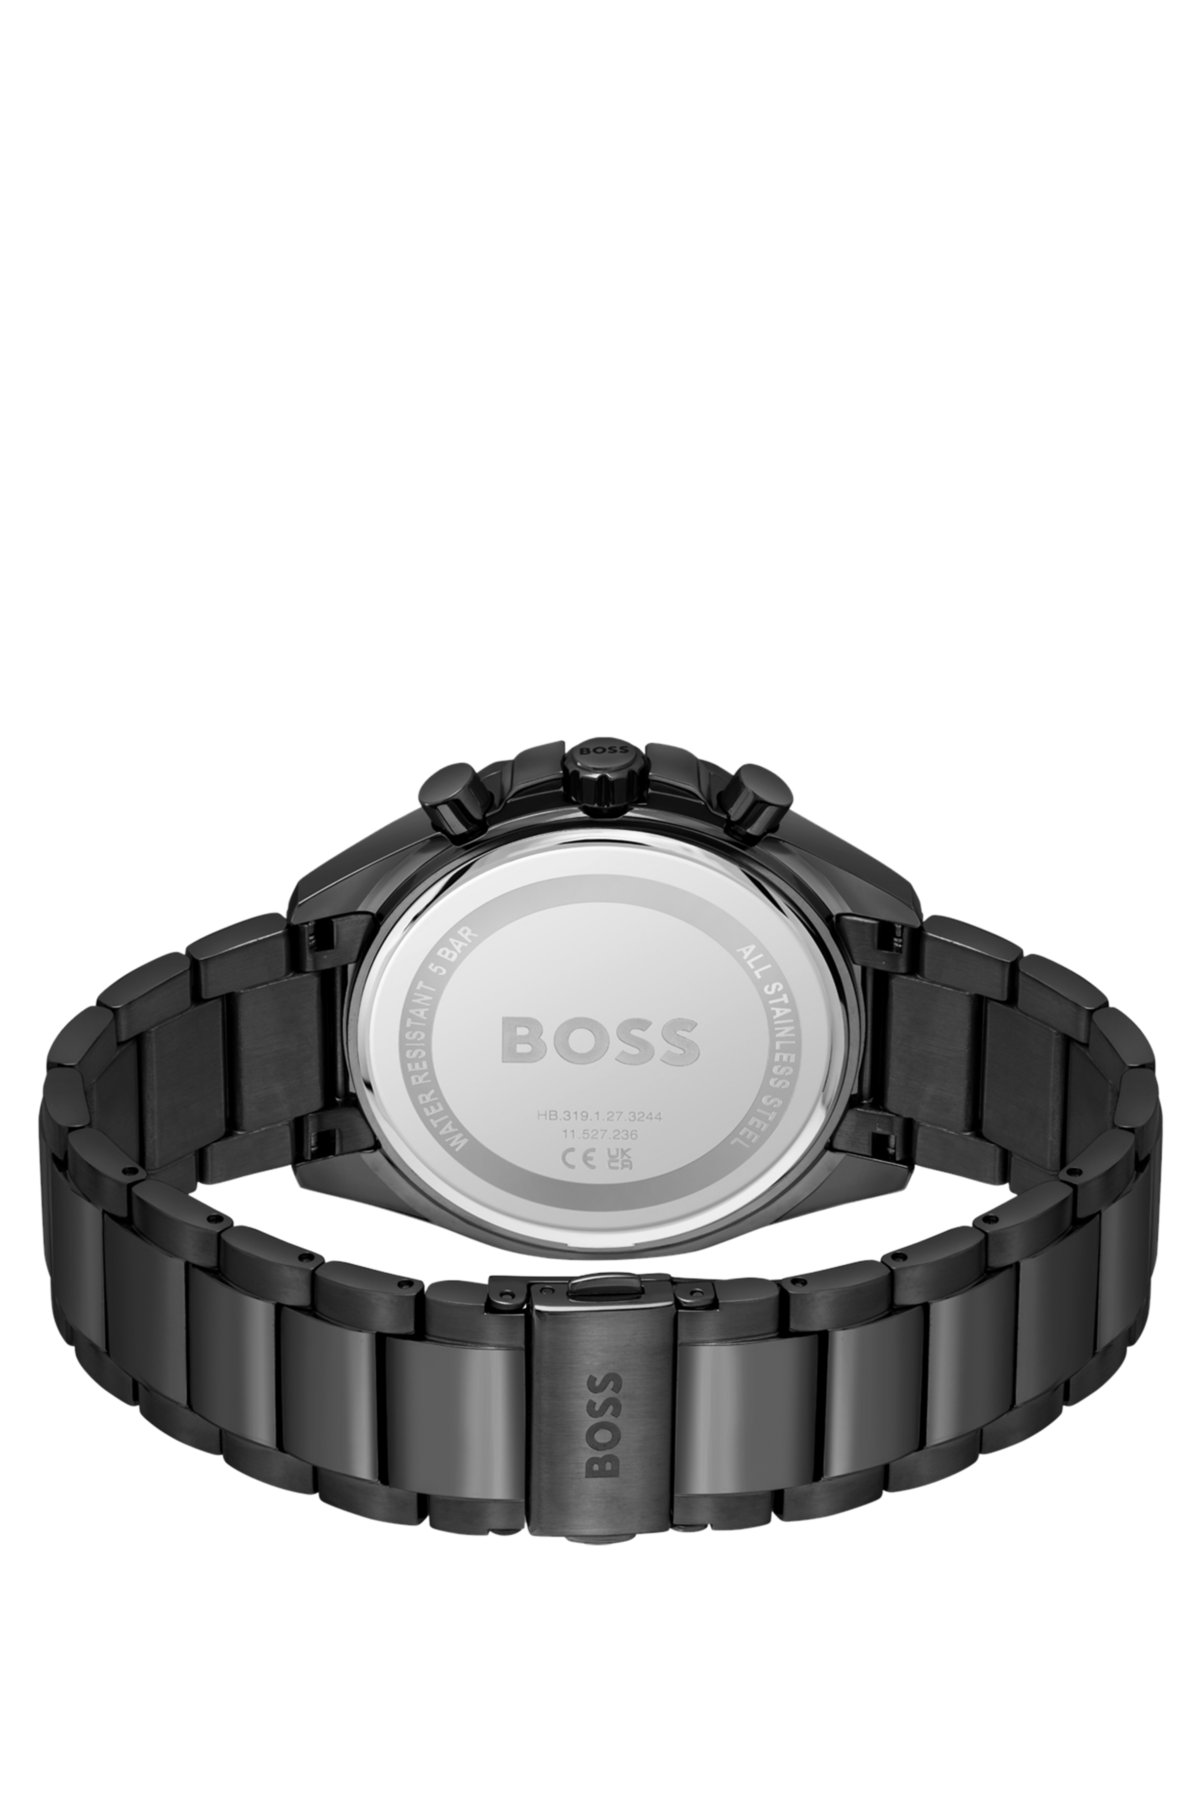 BOSS - Link-bracelet chronograph watch with black dial